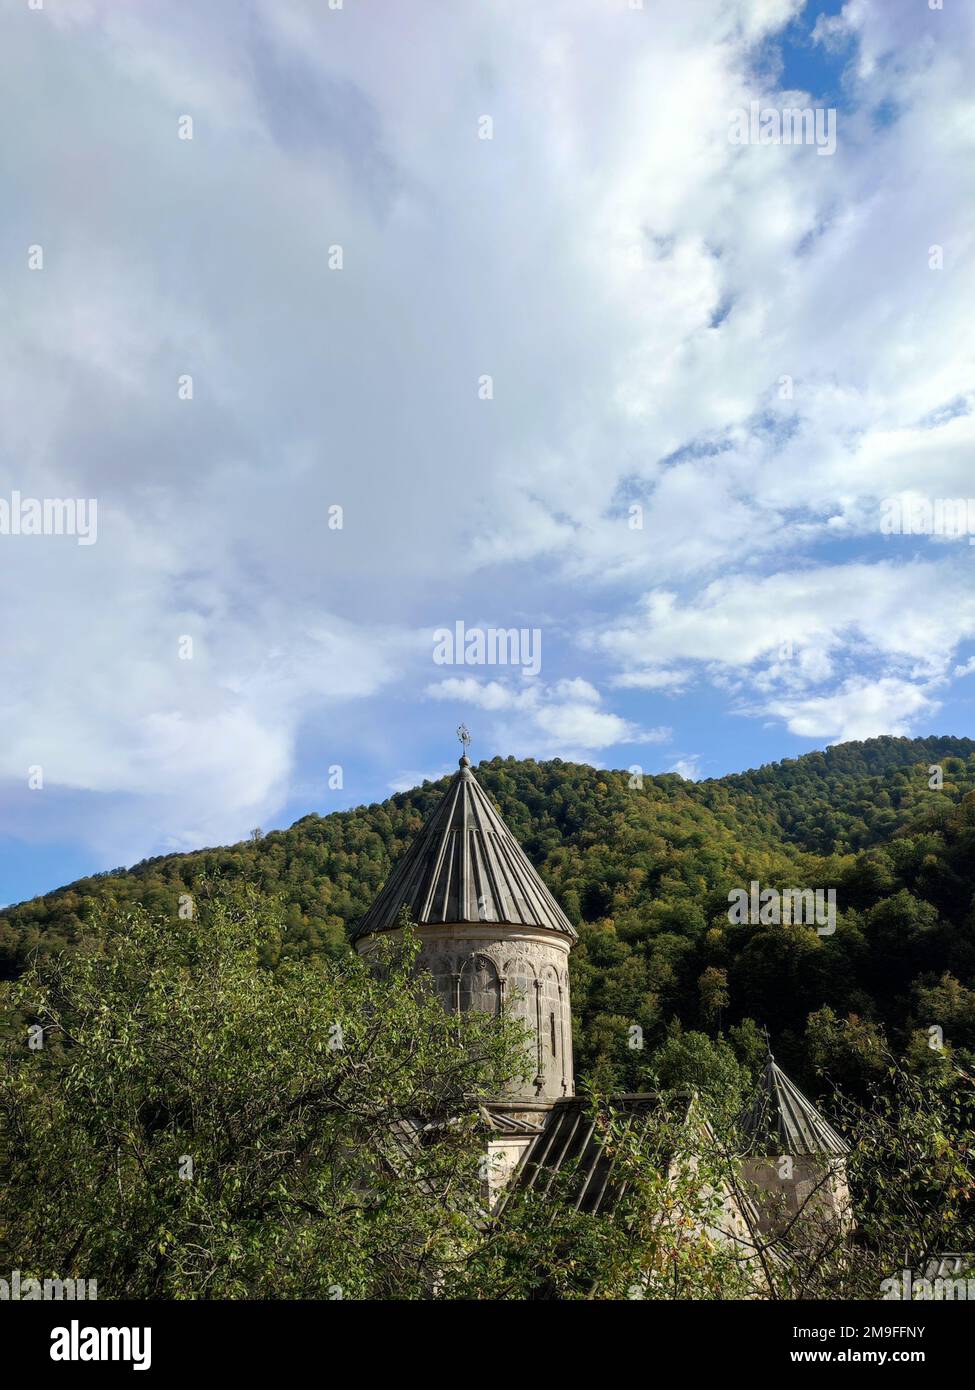 A vertical shot of the dome of the Haghartsin Monastery in Tavush, Armenia, seen behind lush trees Stock Photo